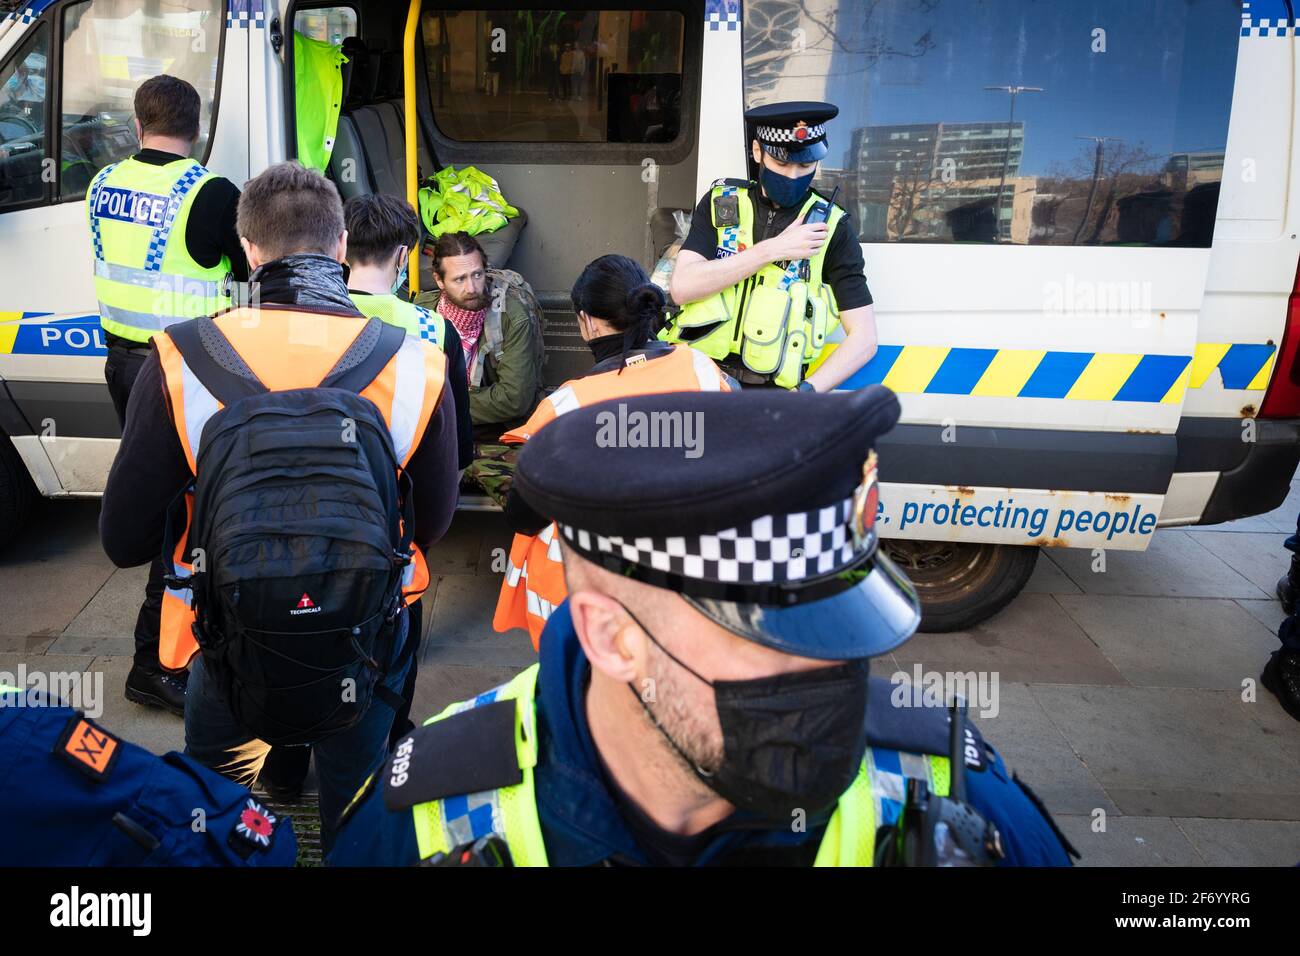 Manchester, UK. 03rd Apr, 2021. A protester is detained by police during a ÔKill The BillÕ demonstration. Protests continue throughout the country due to the proposed Police, Crime and Sentencing Bill that, if passed, would introduce new legislation around protesting. Credit: Andy Barton/Alamy Live News Stock Photo